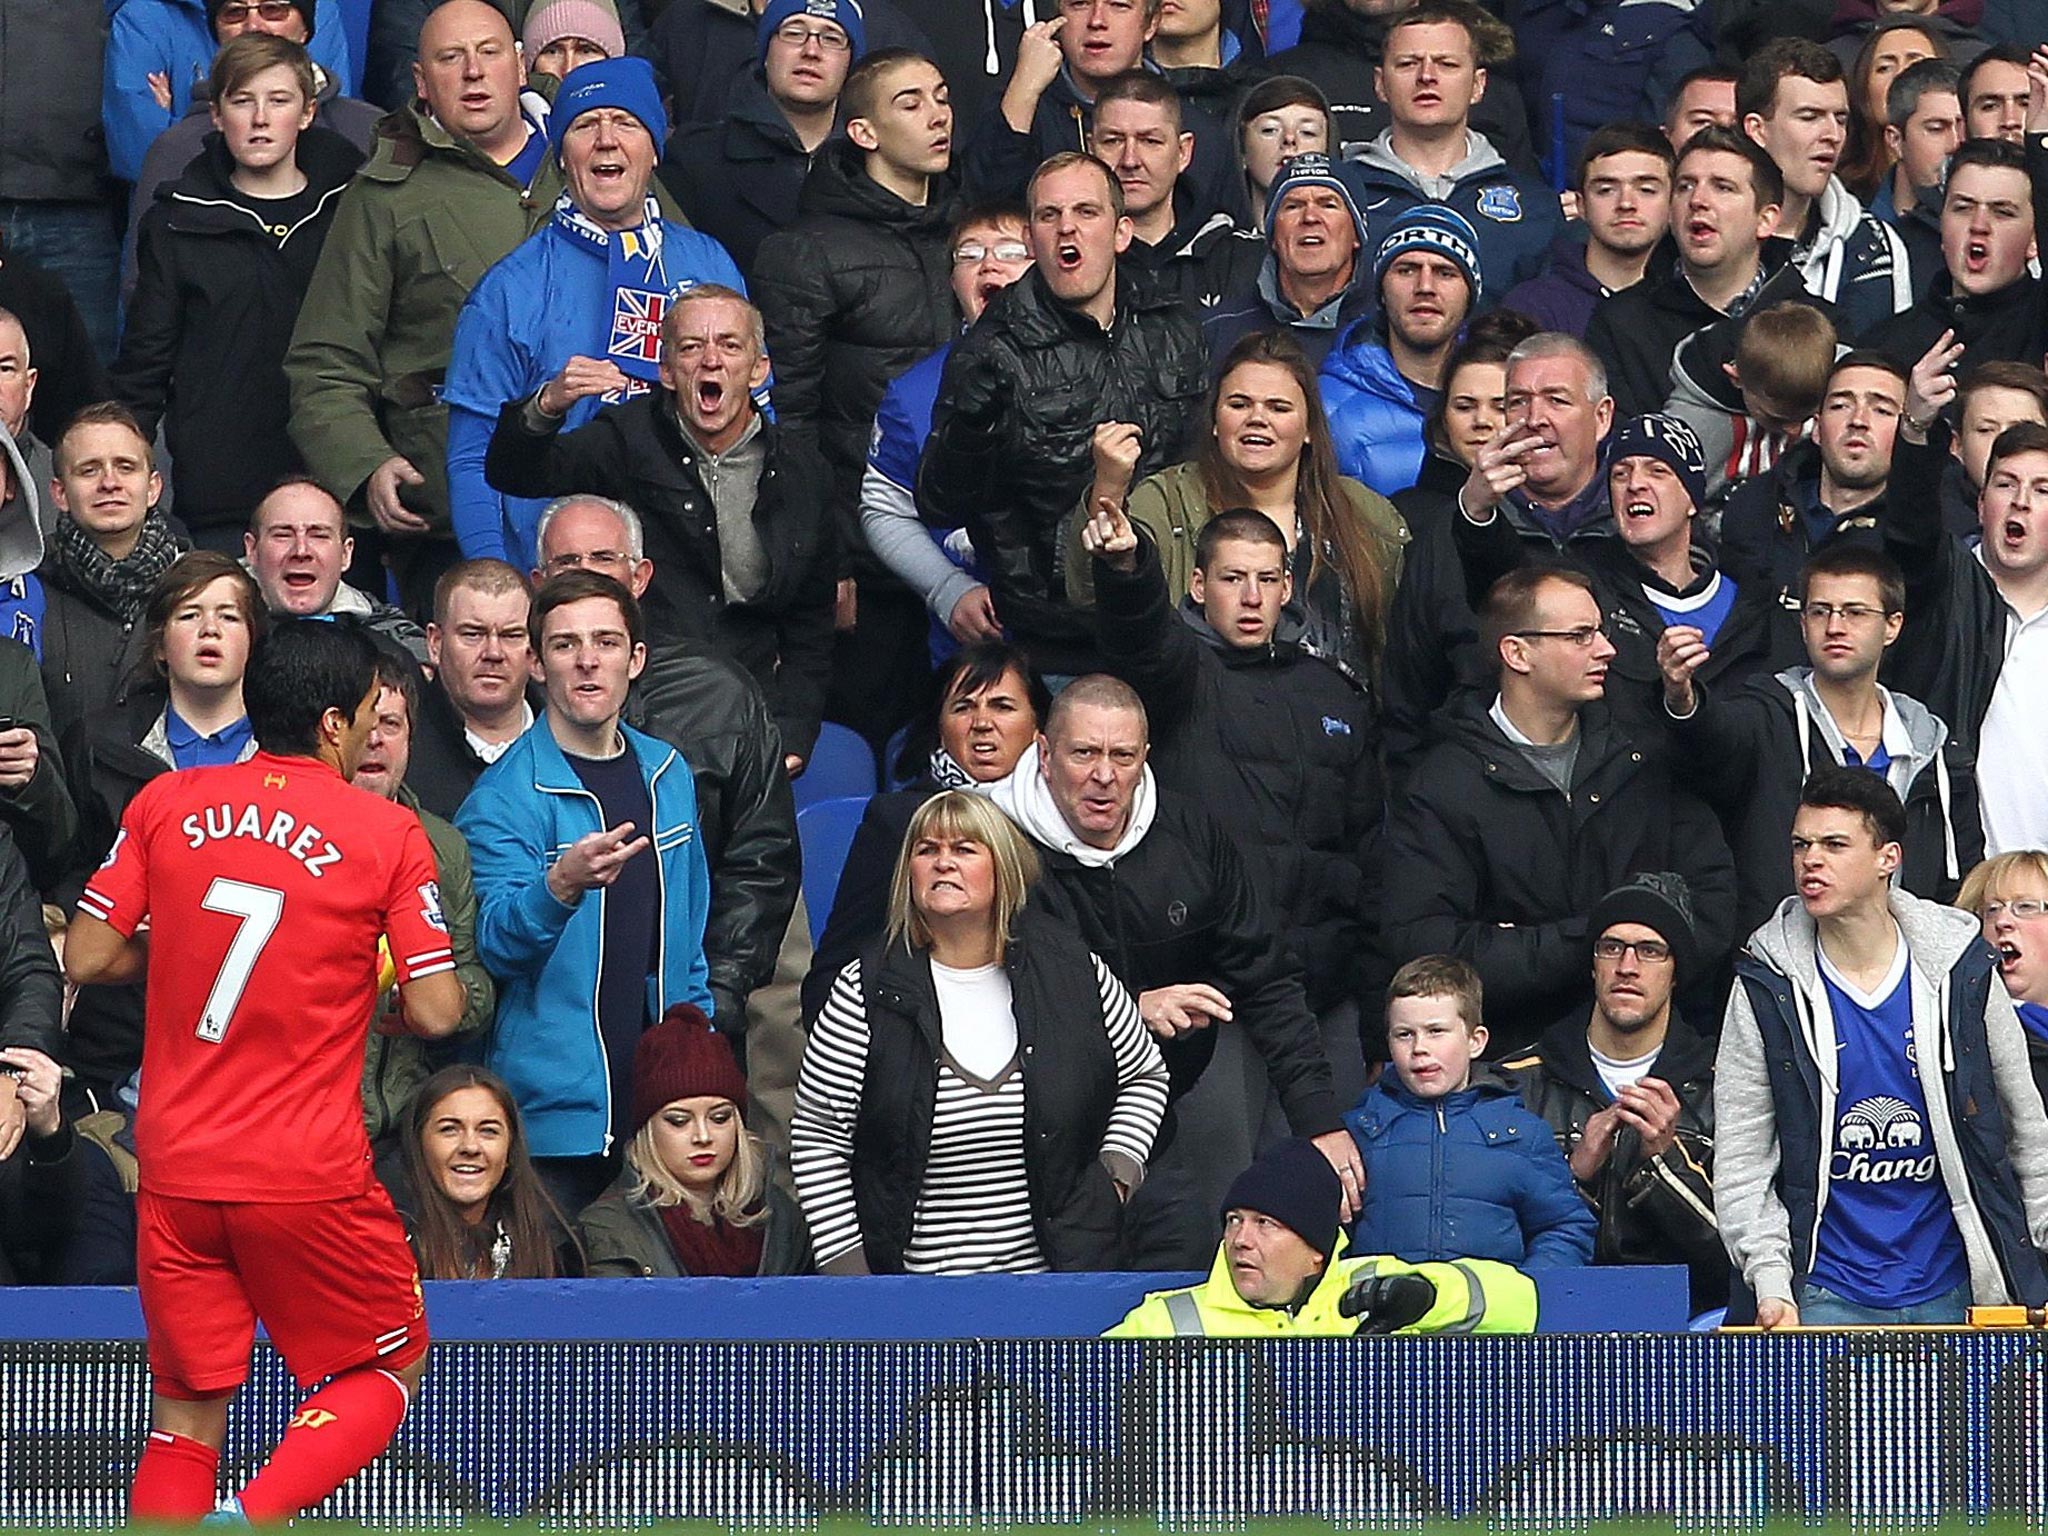 Liverpool’s Luis Suarez is given a warm reception by Everton supporters during a recent trip to Goodison Park